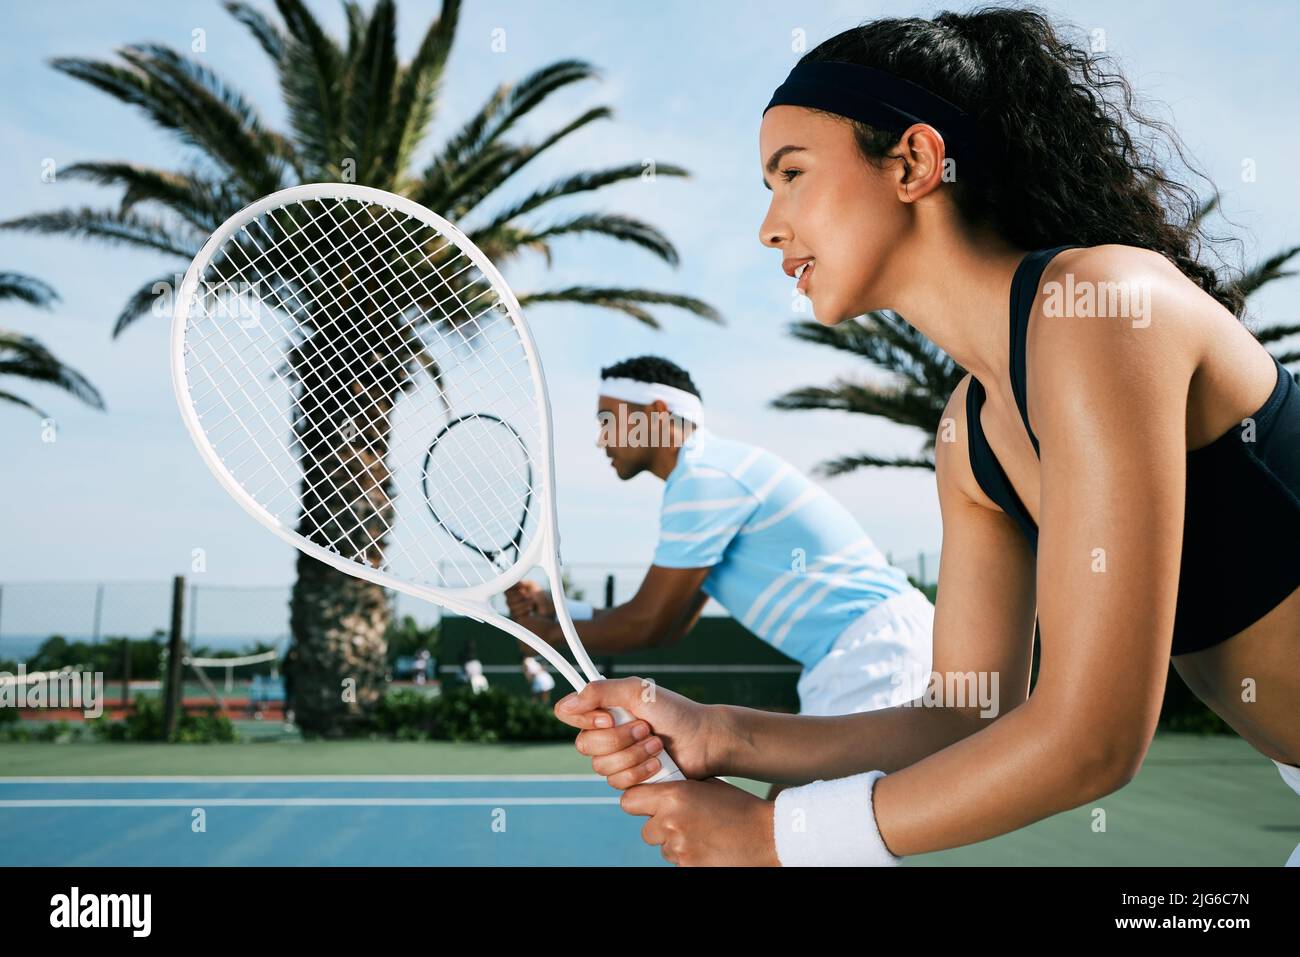 We got this. Shot of an attractive young woman standing and playing tennis with her teammate. Stock Photo